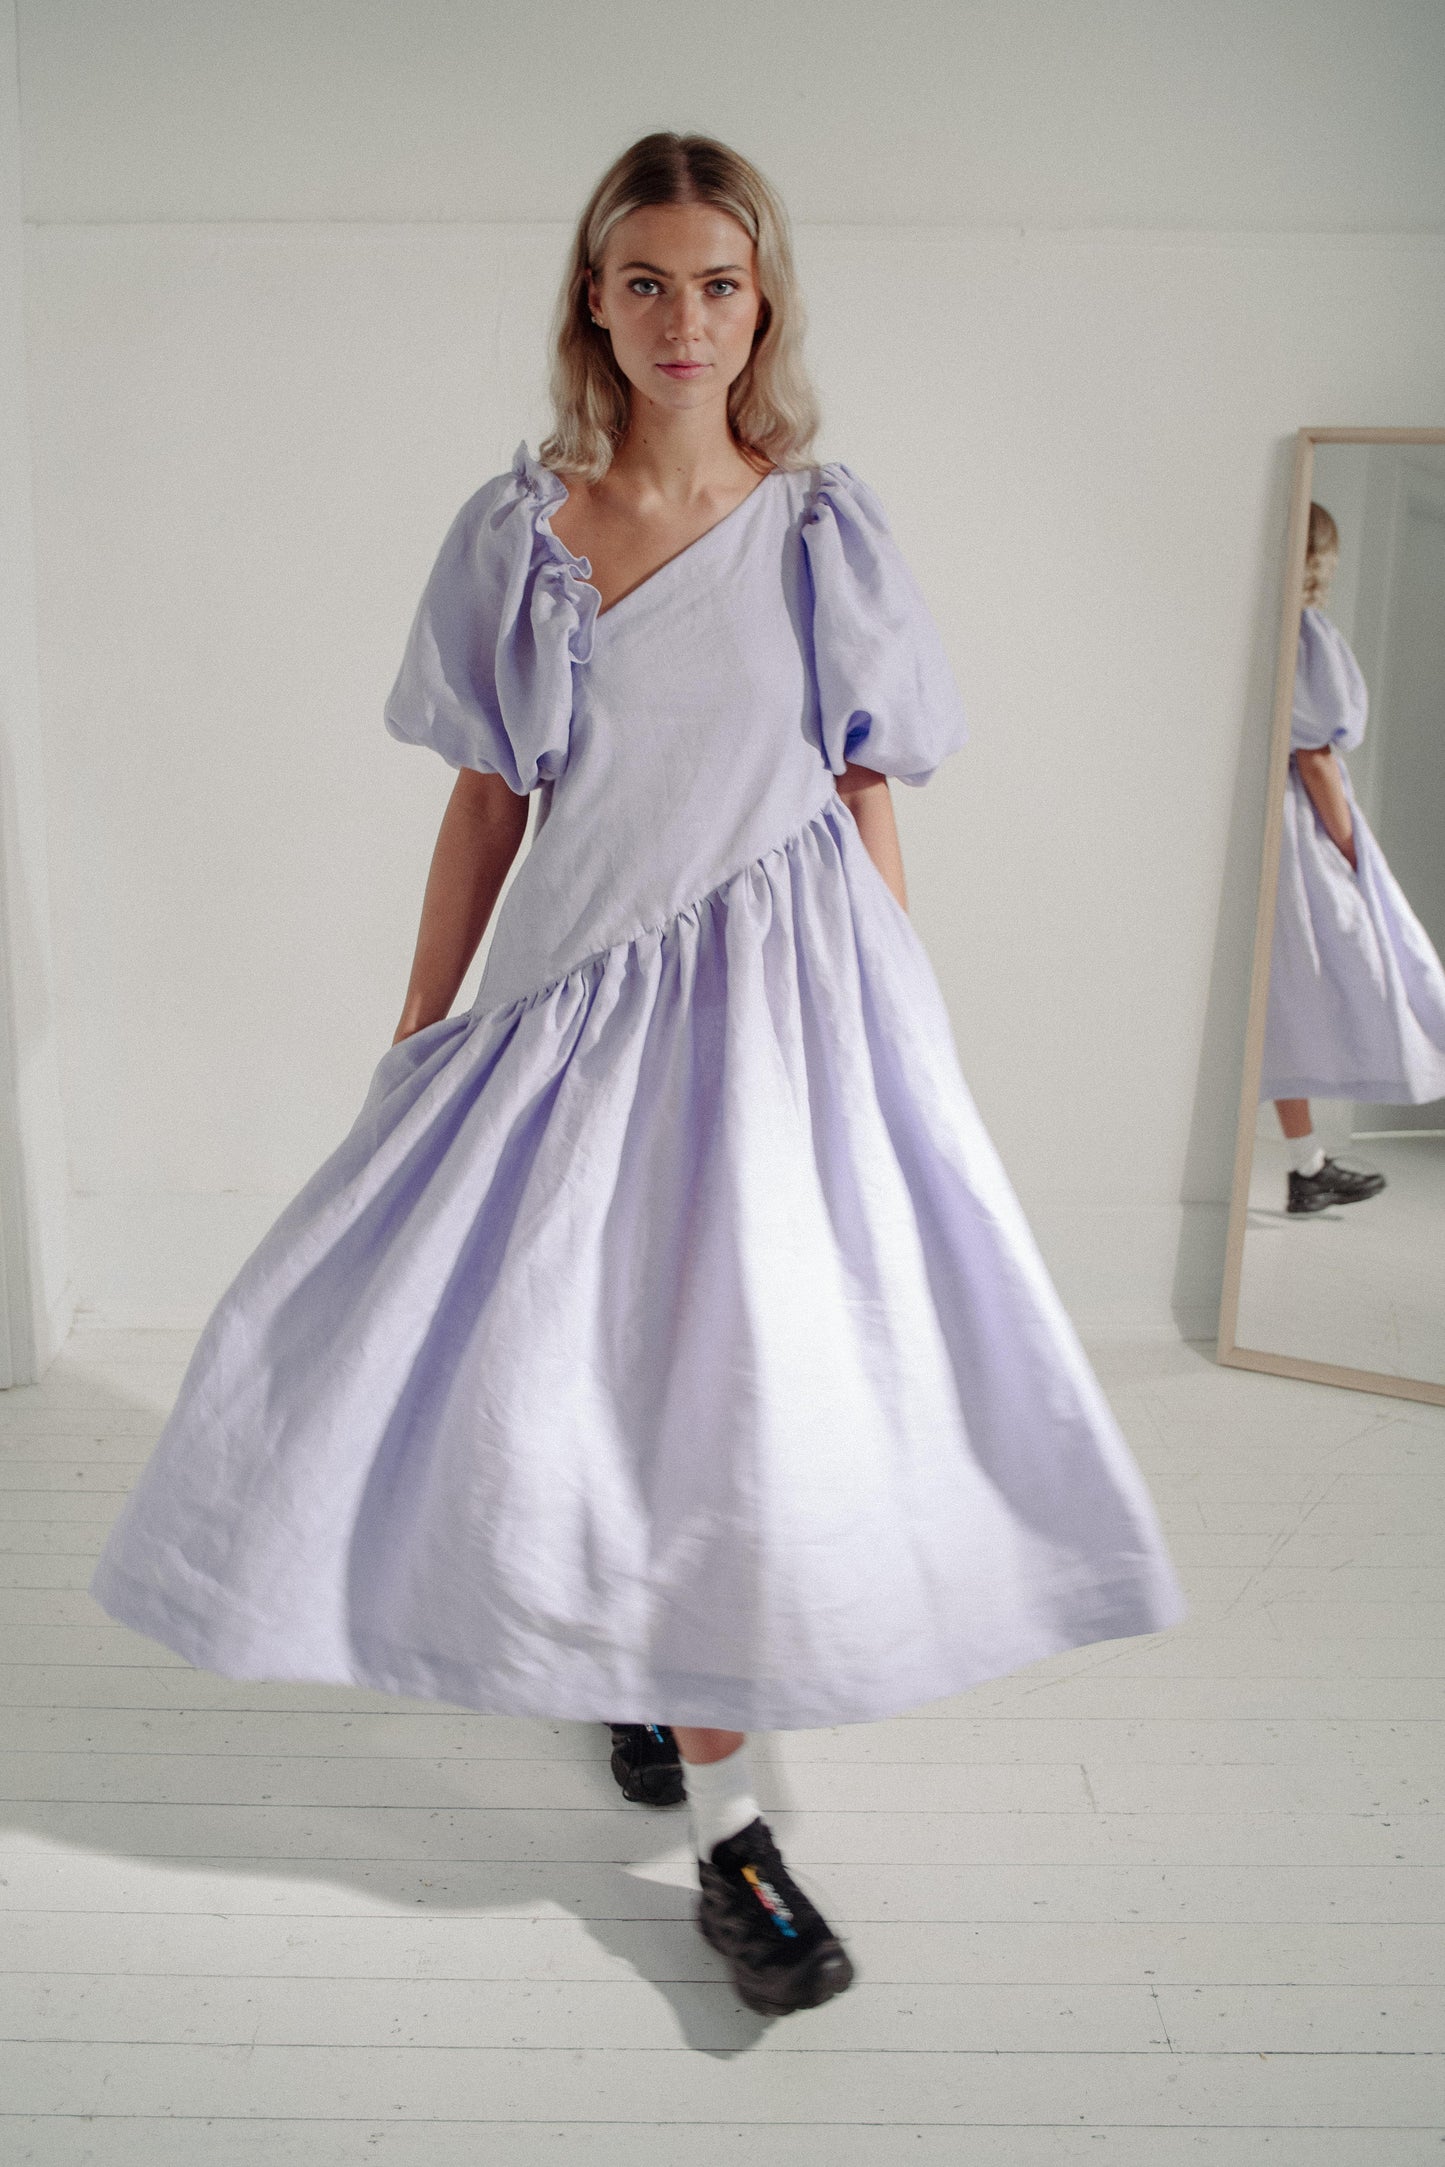 ANGELINA DRESS | LAVENDER | Angelina- our statement dress this season. She's a little over-the-top, yet so wearable in our very 'Kindred' way. Pop her on with sneakers or bold block heels alike, and she'll make a statement in any room she enters. Cut with